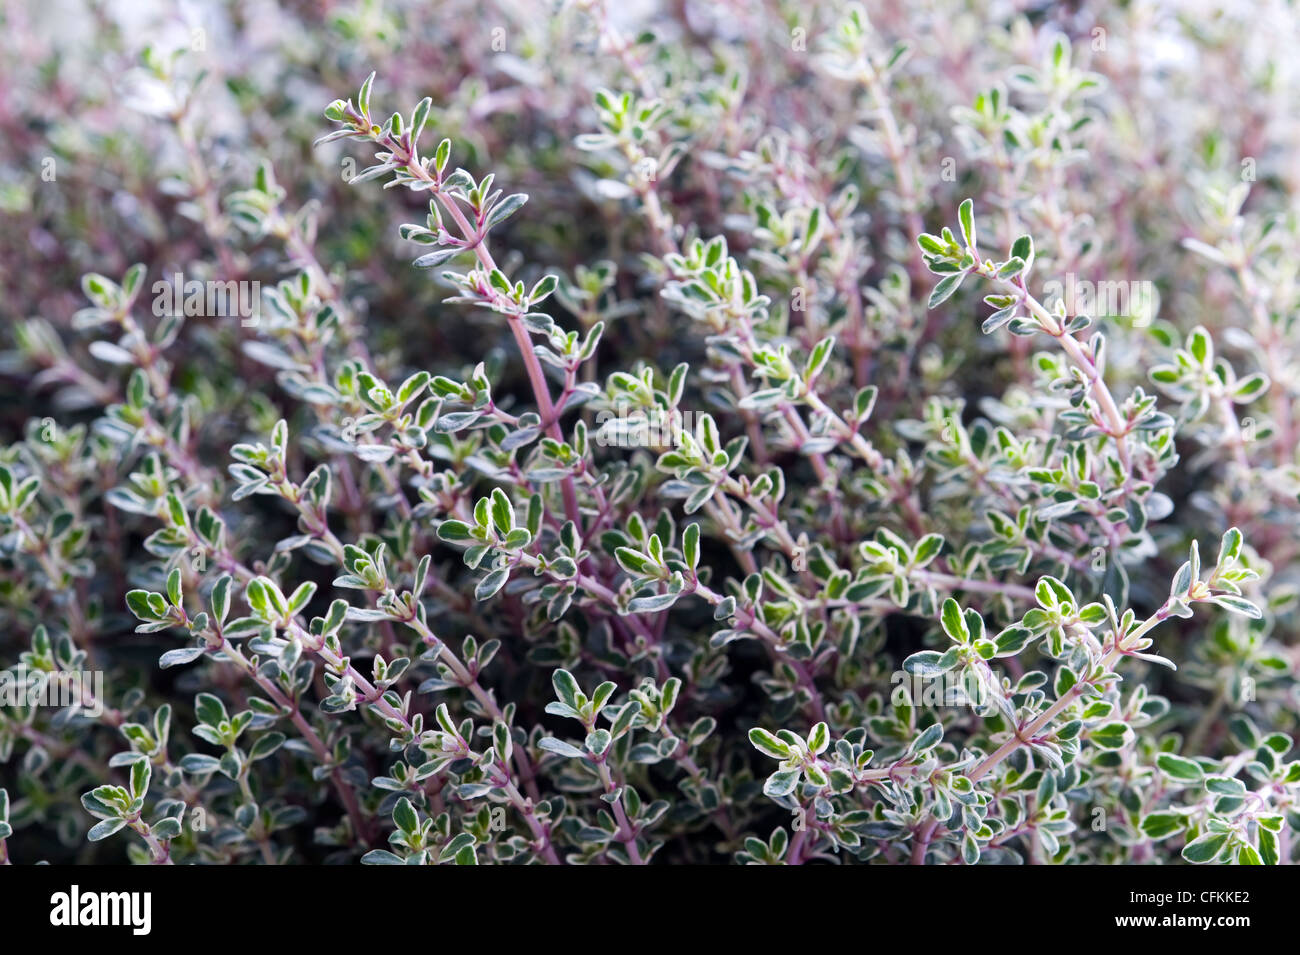 thyme silver queen growing Stock Photo